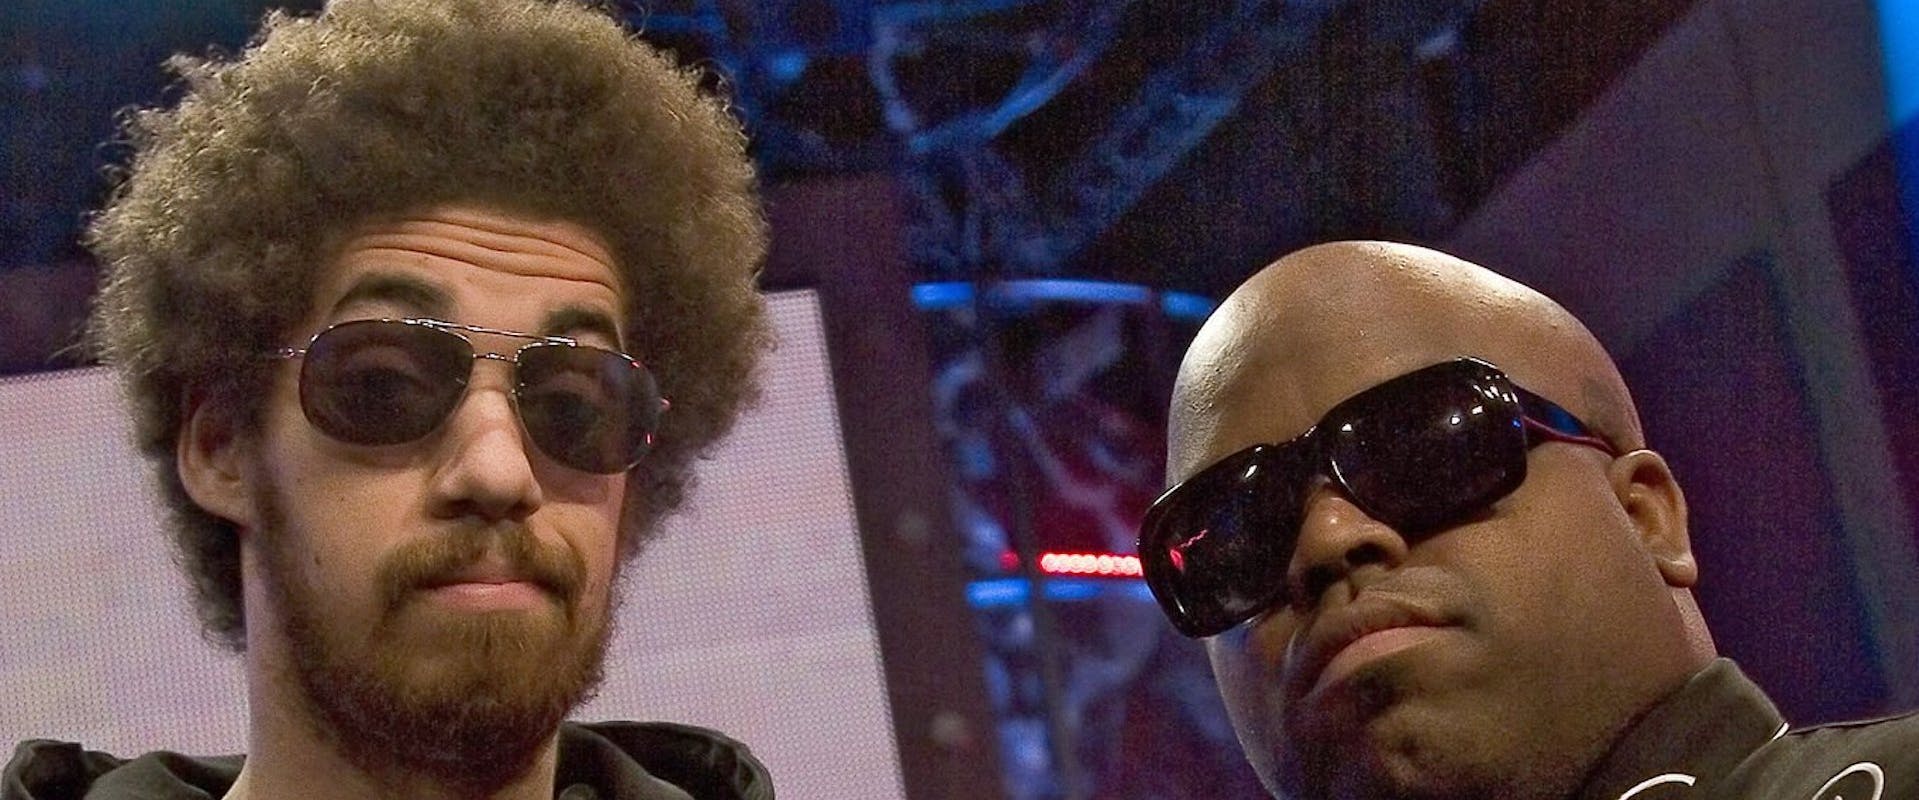 (L-R) DJ DANGER MOUSE and CEELO GREEN of the duo Gnarls Barkley